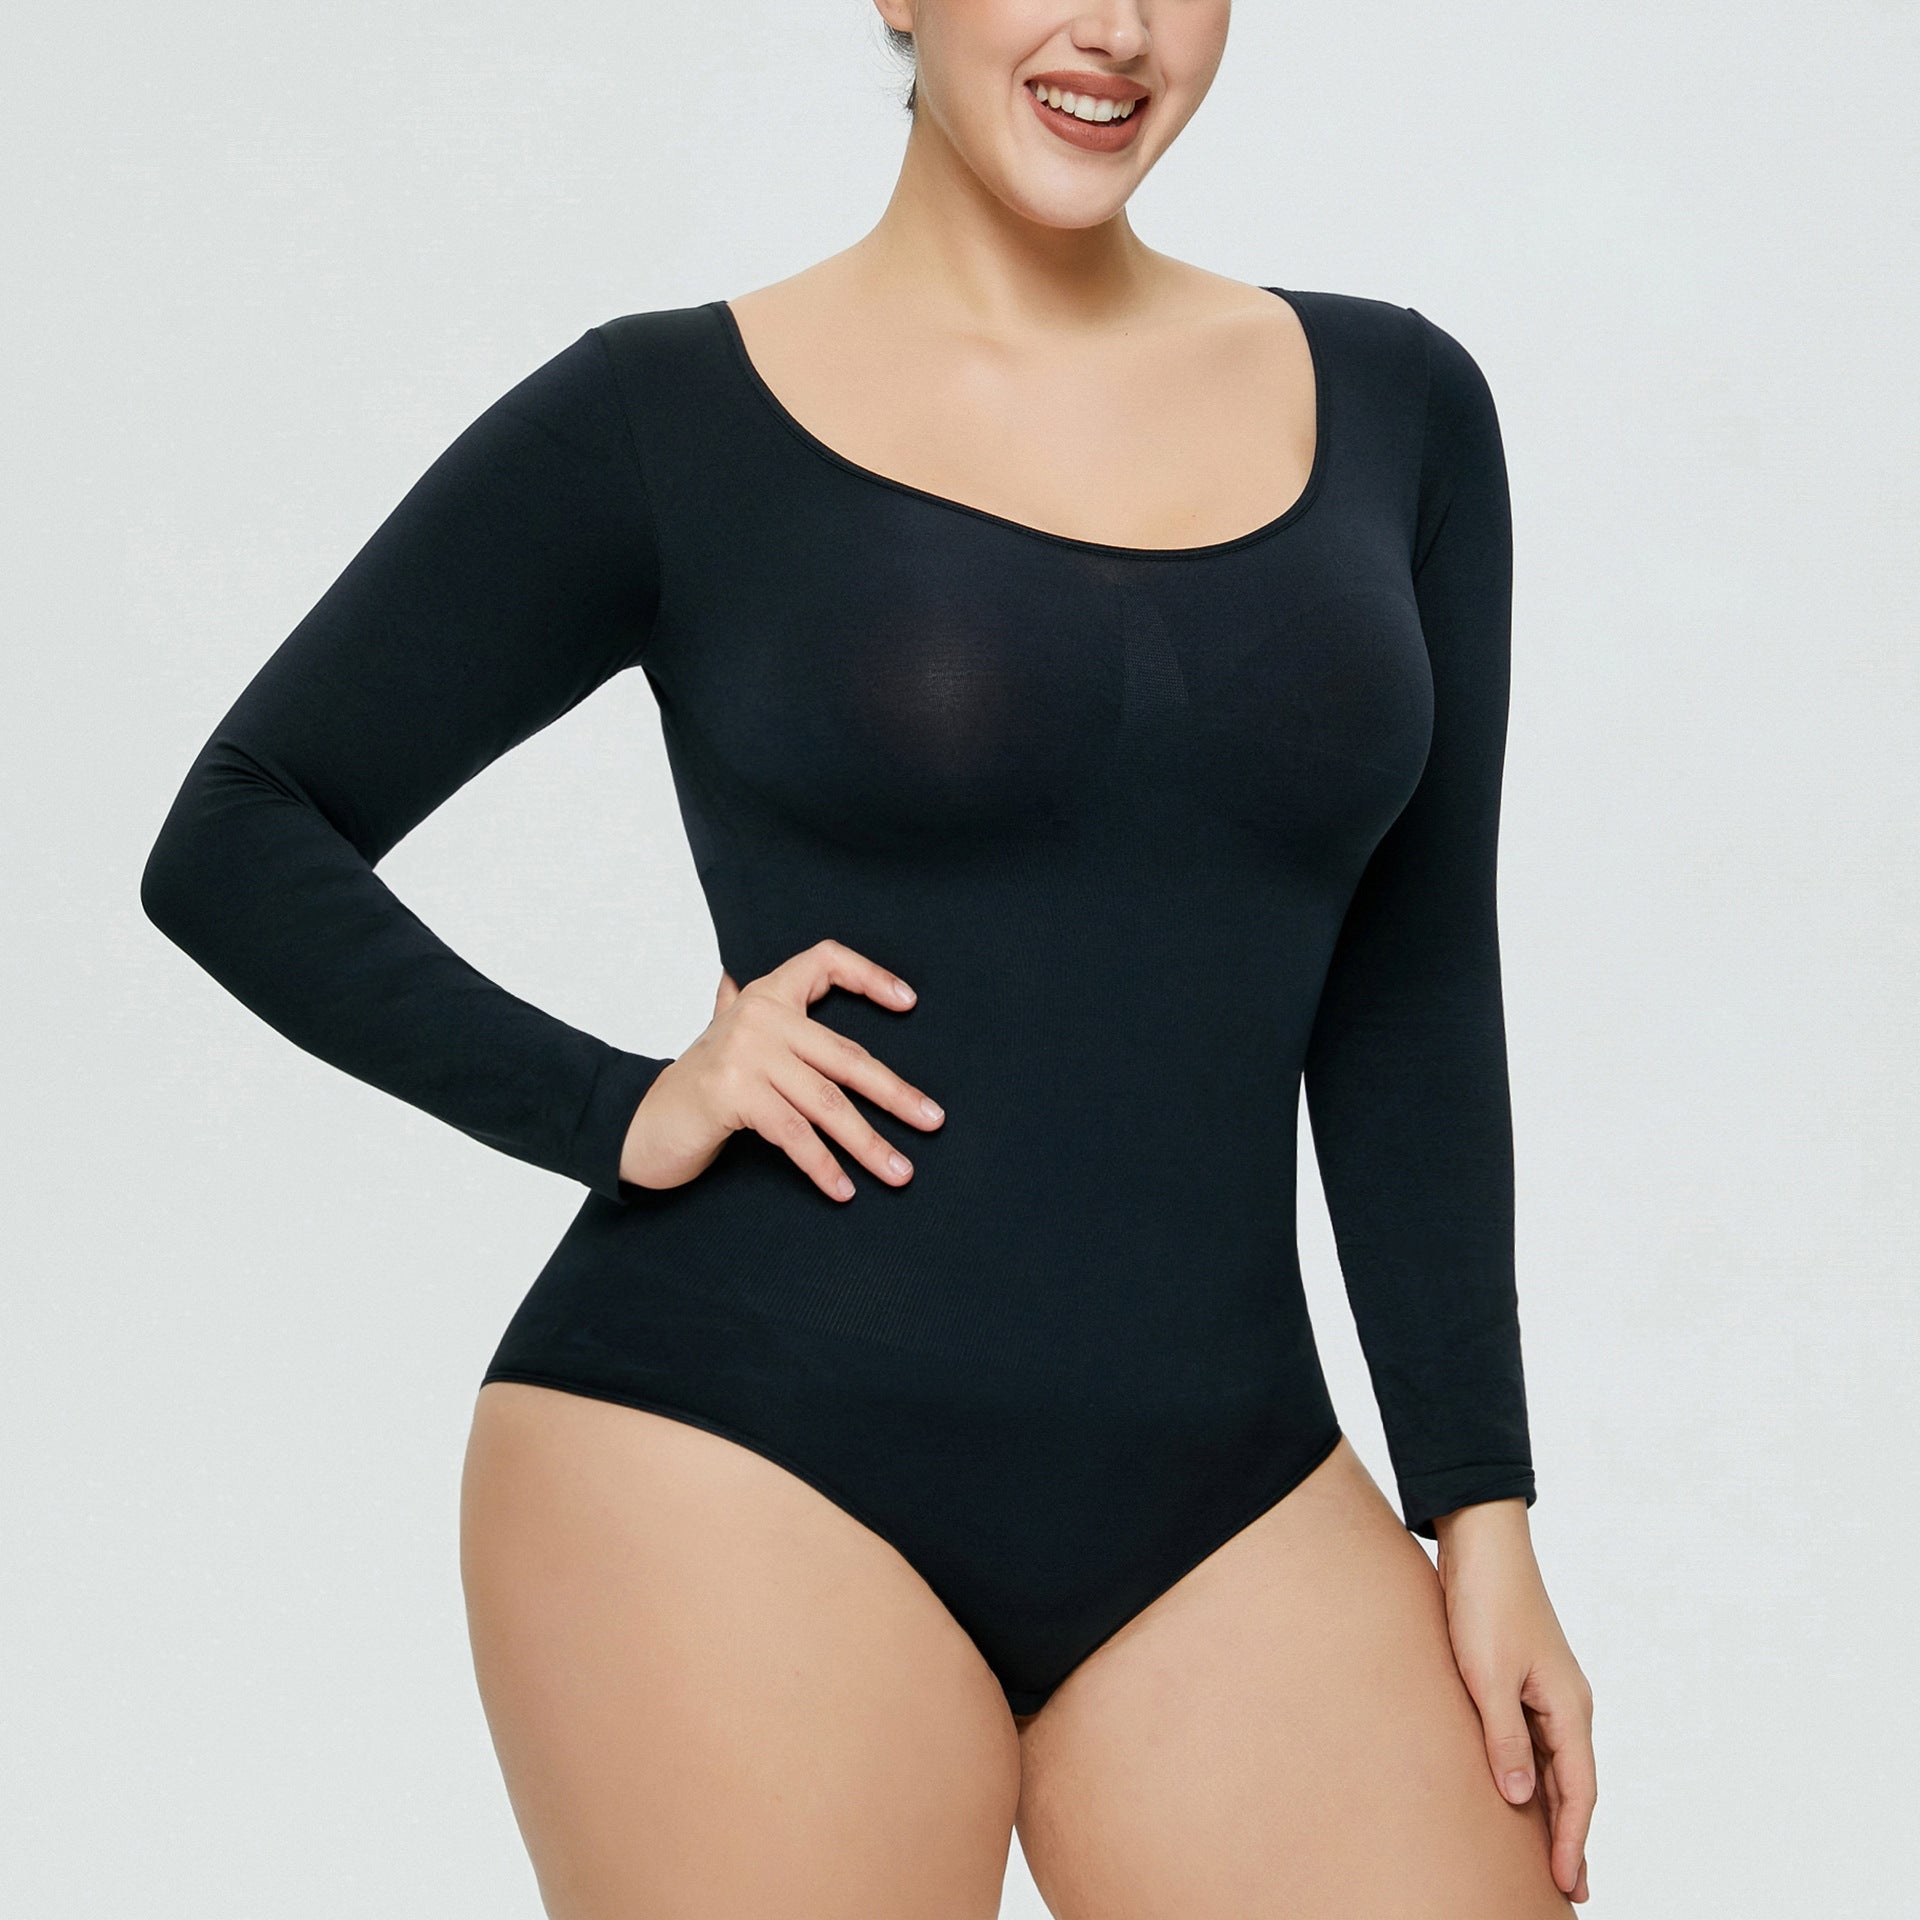 Lovemi -  Women's One-piece Bottoming Shirt Long-sleeved Corset Body Shaper Seamless Jumpsuit Home Fitness Yoga Clothes